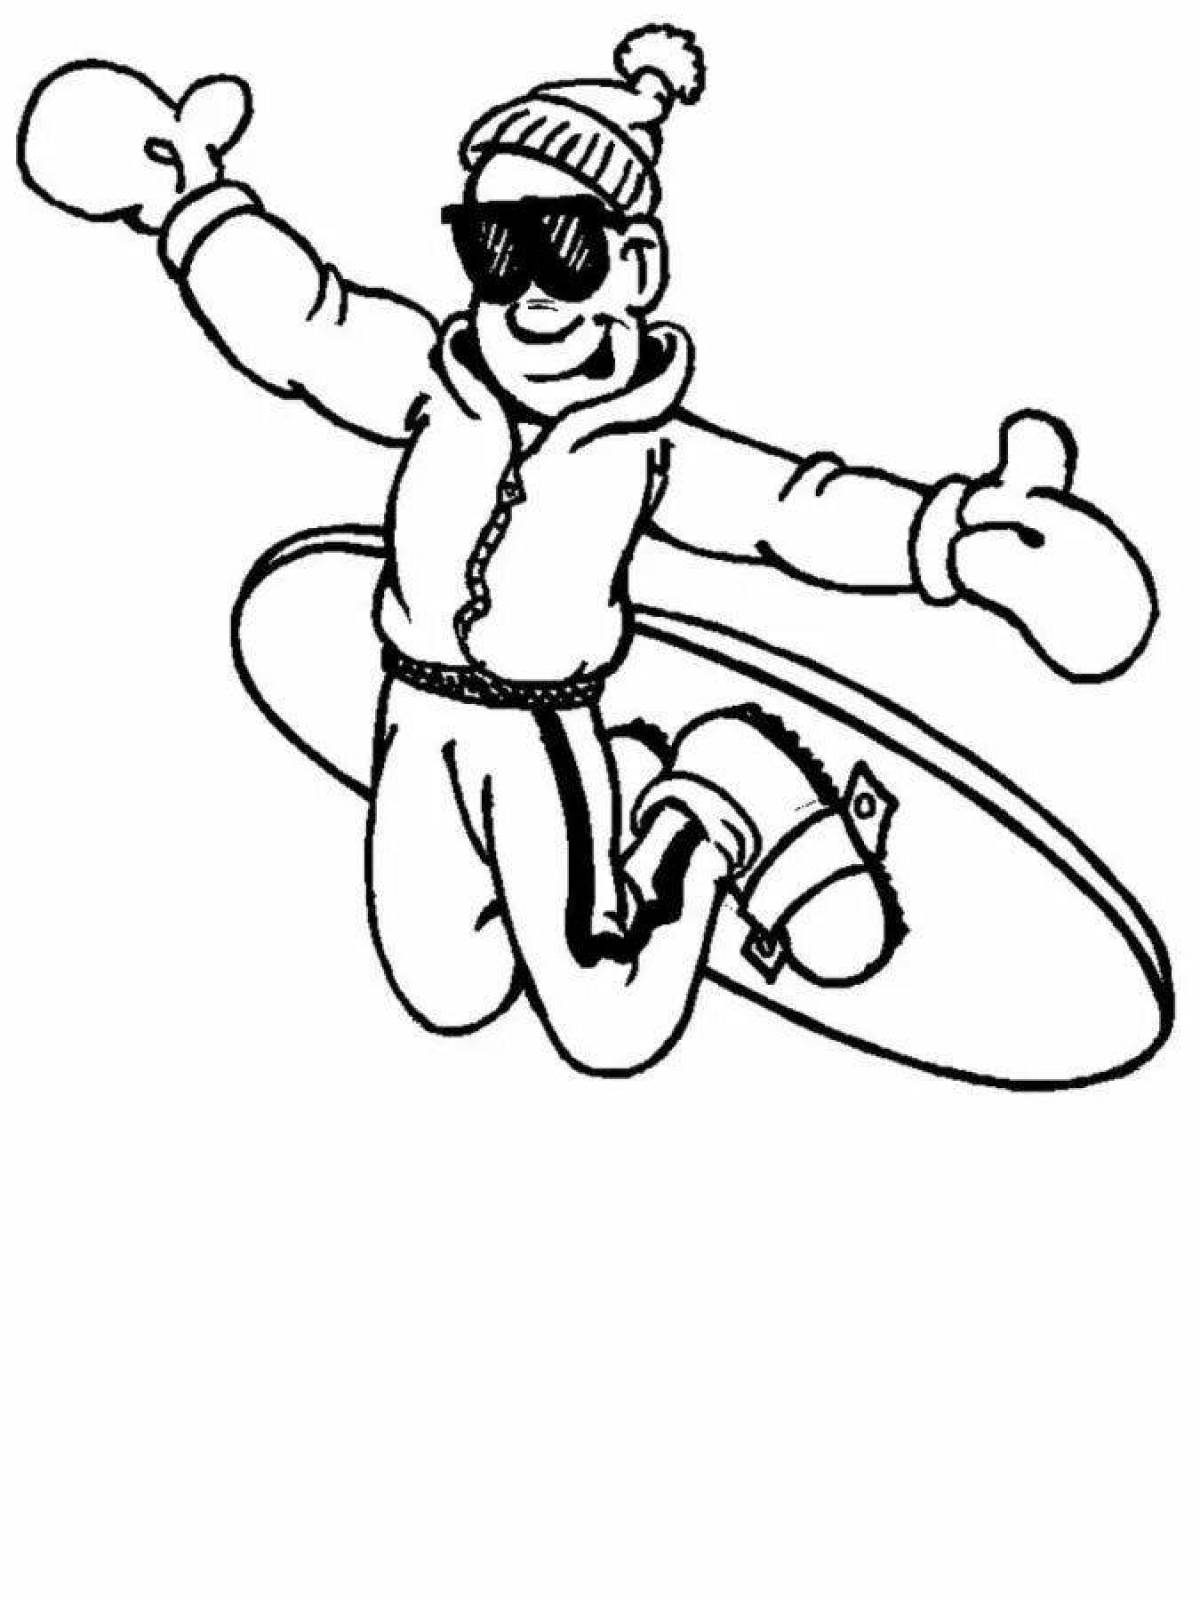 Vibrant winter sports coloring page